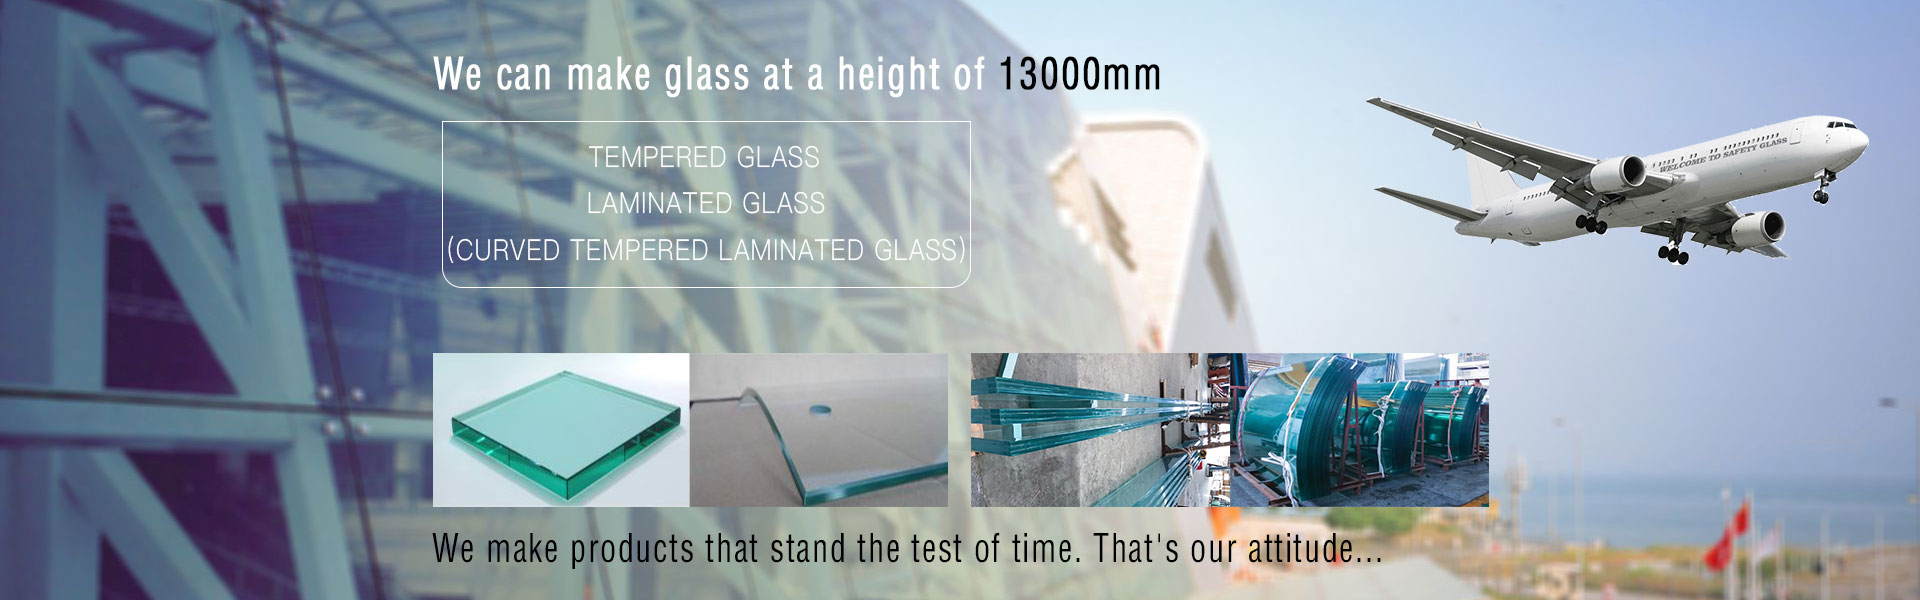 Dongguan Safety Glass Products Co,.Ltd